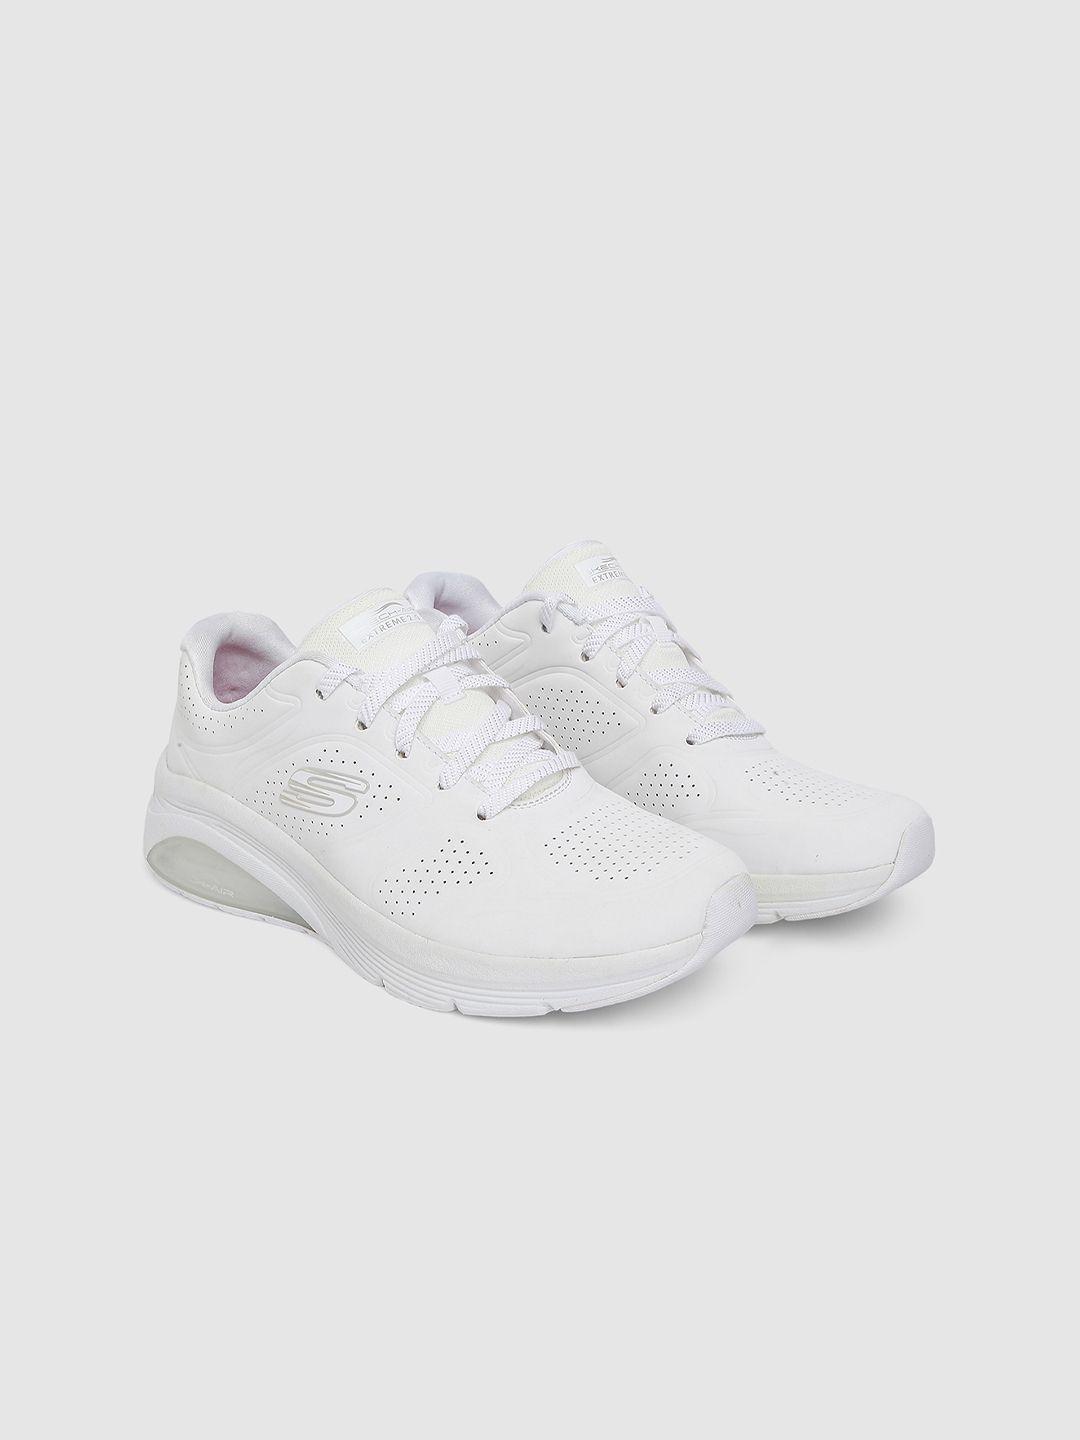 skechers women white solid casual shoes